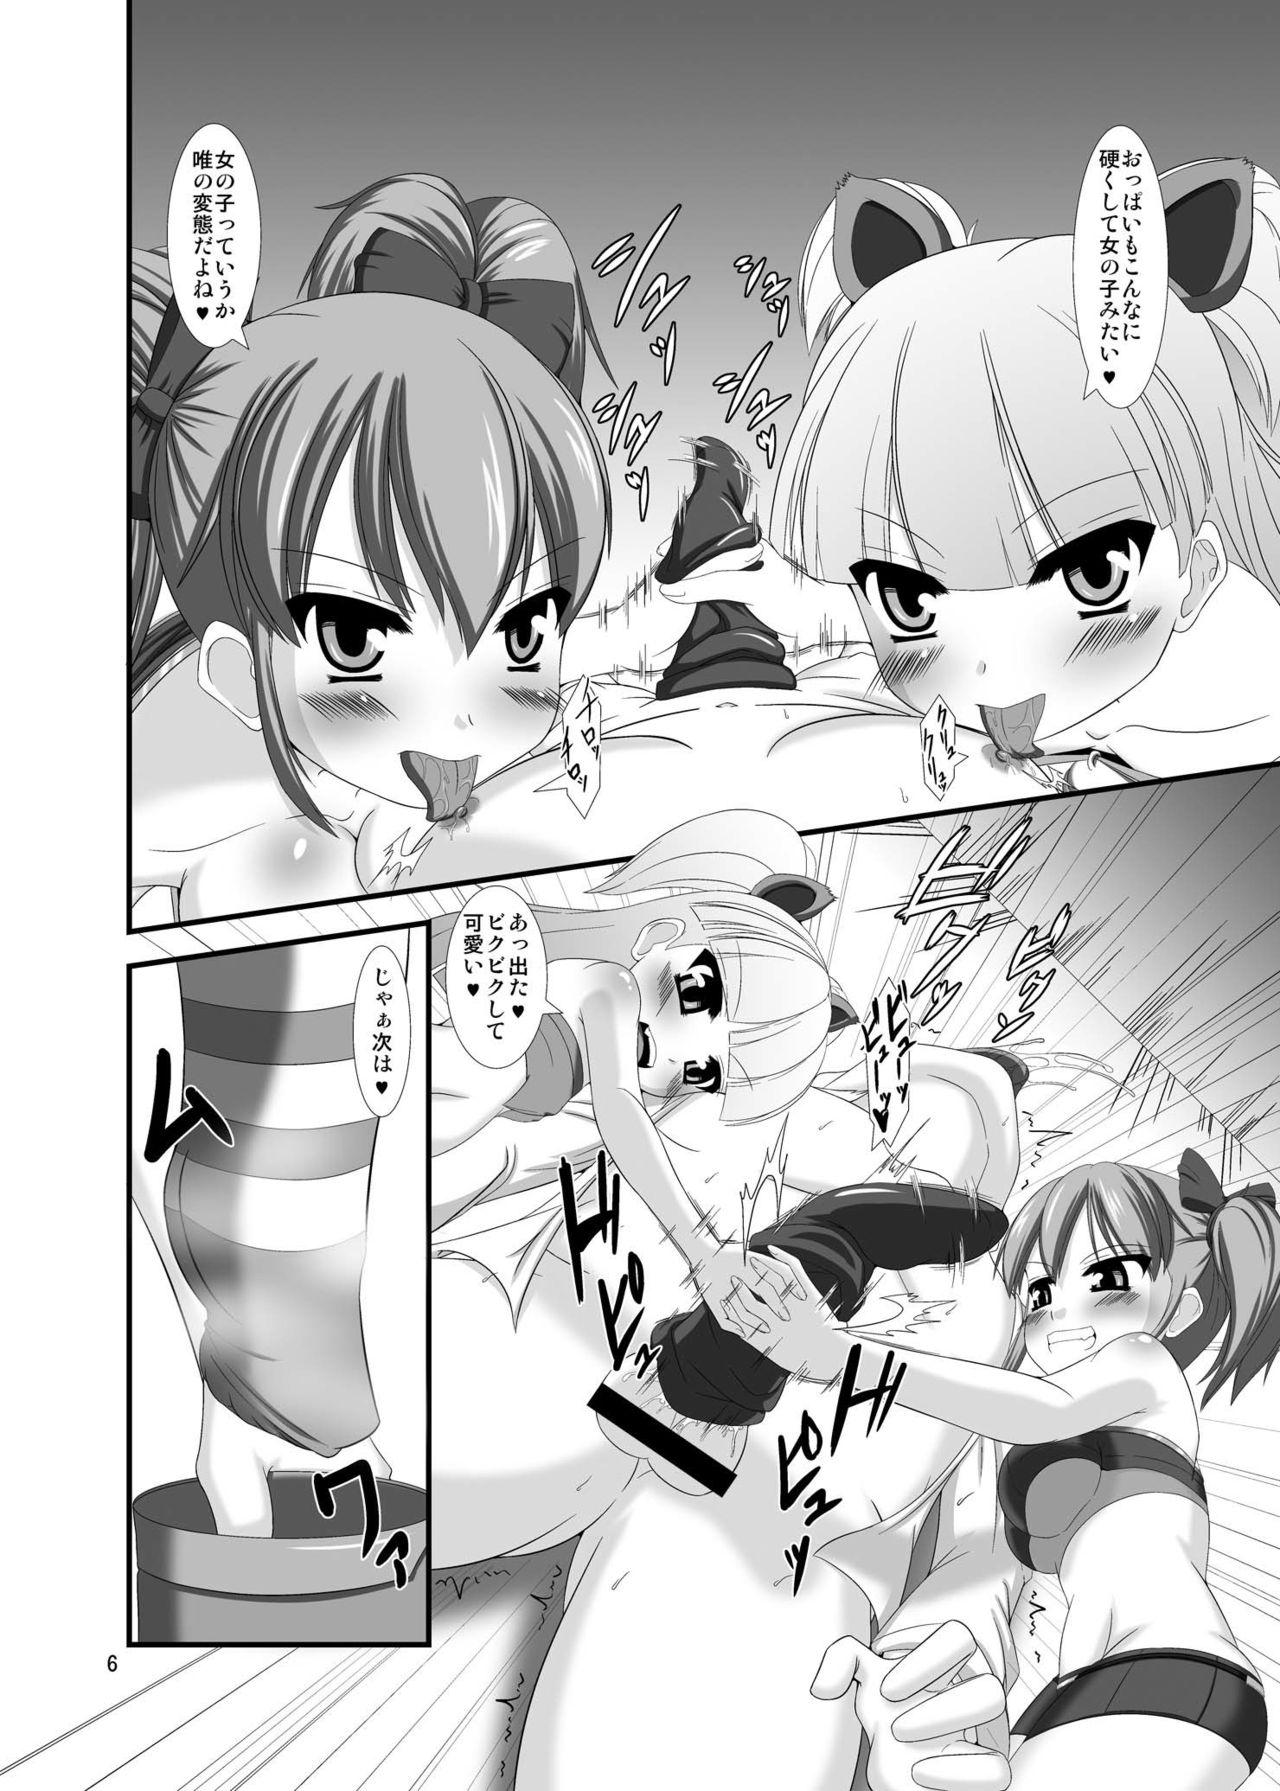 Wild Mobam@s Do-M Hoihoi - The idolmaster Gaystraight - Page 6